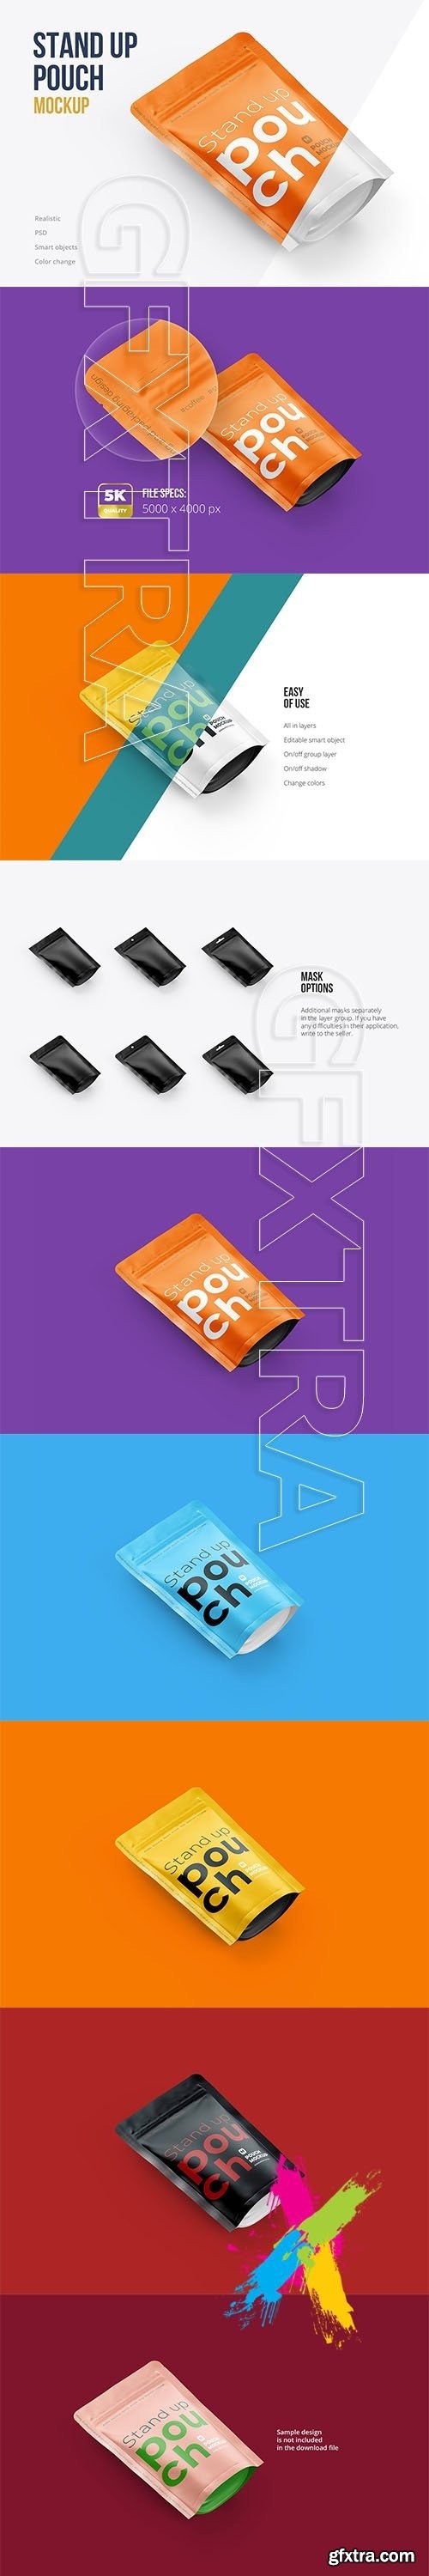 CreativeMarket - Stand Up Pouch Mockup Top Half Side 5142934